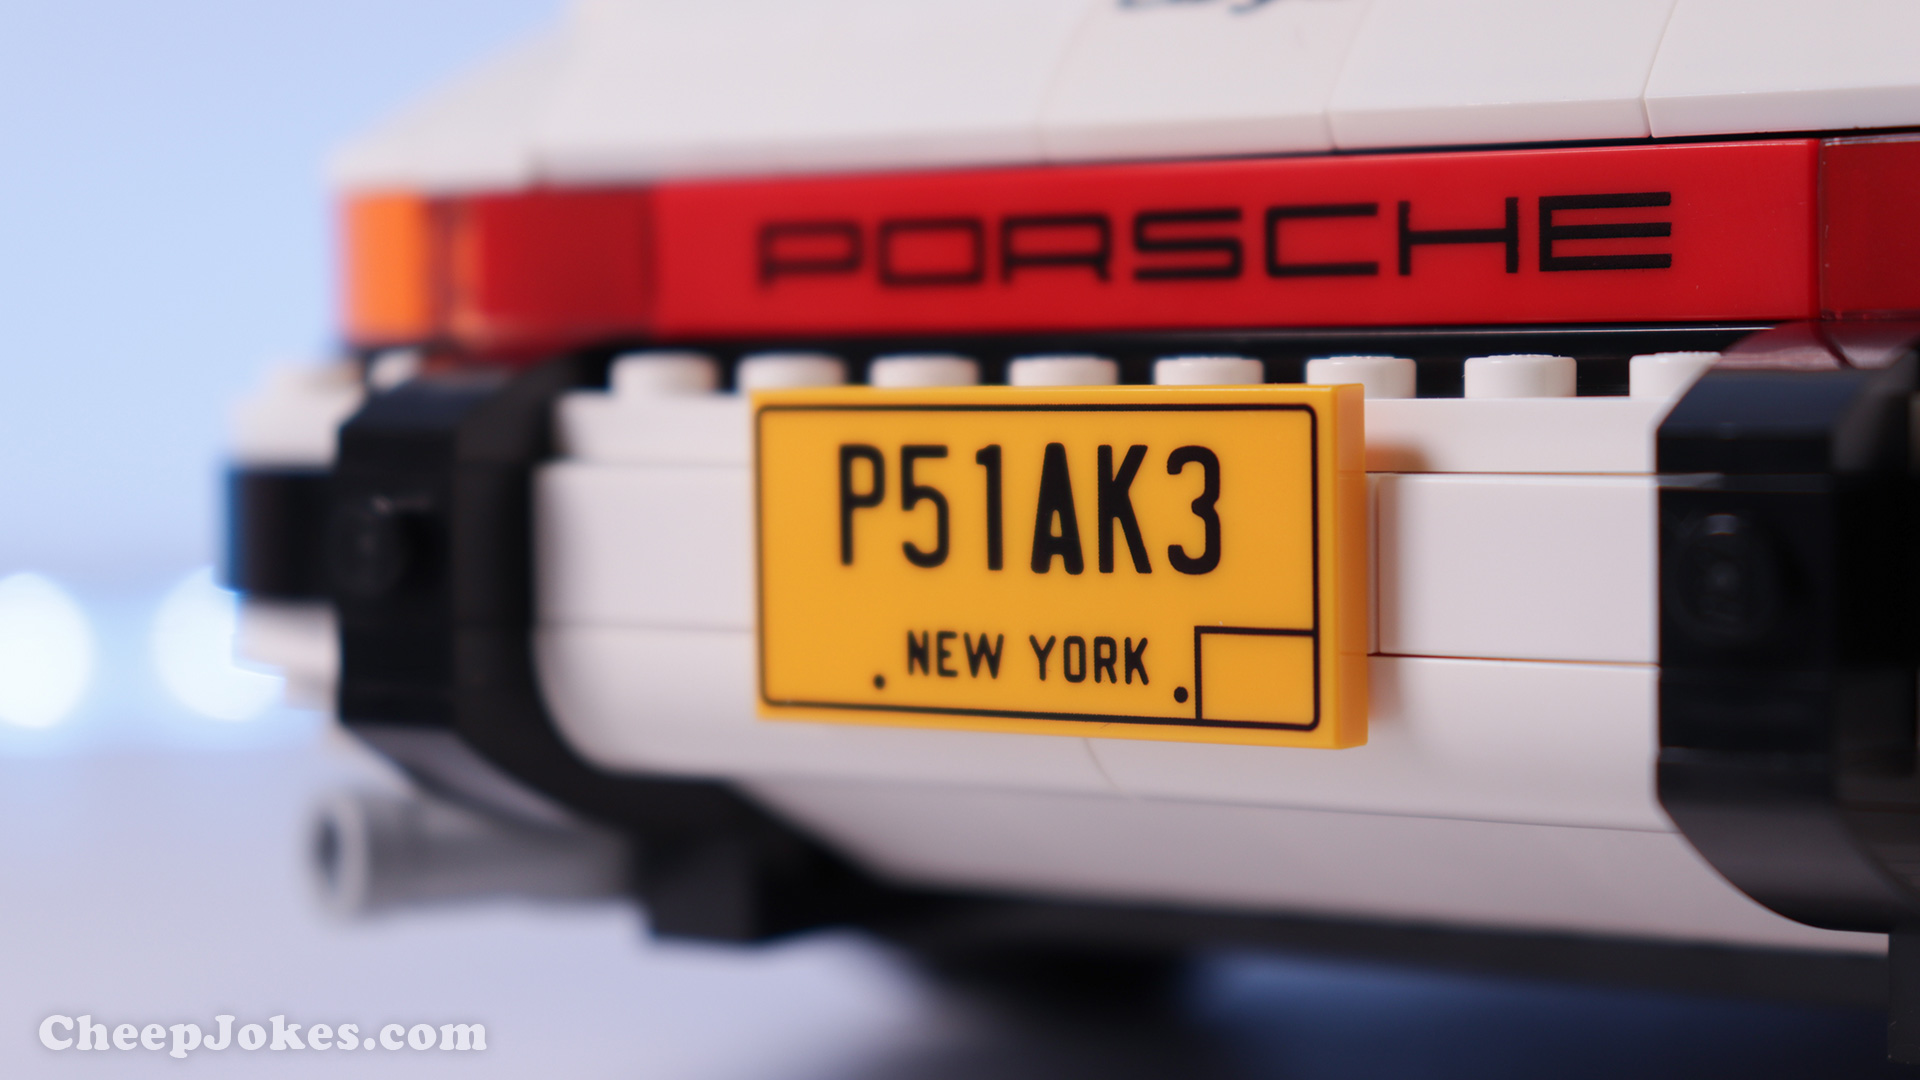 LEGO 10295 – Porsche 911 Targa and 911 Turbo  The LEGO® Group has taken the covers off a new LEGO version of one of the most coveted nameplates in automotive history, with the unveiling of the two-in-one LEGO Porsche 911 Turbo and 911 Targa set that brings together two icons from the 1970s and 80s.